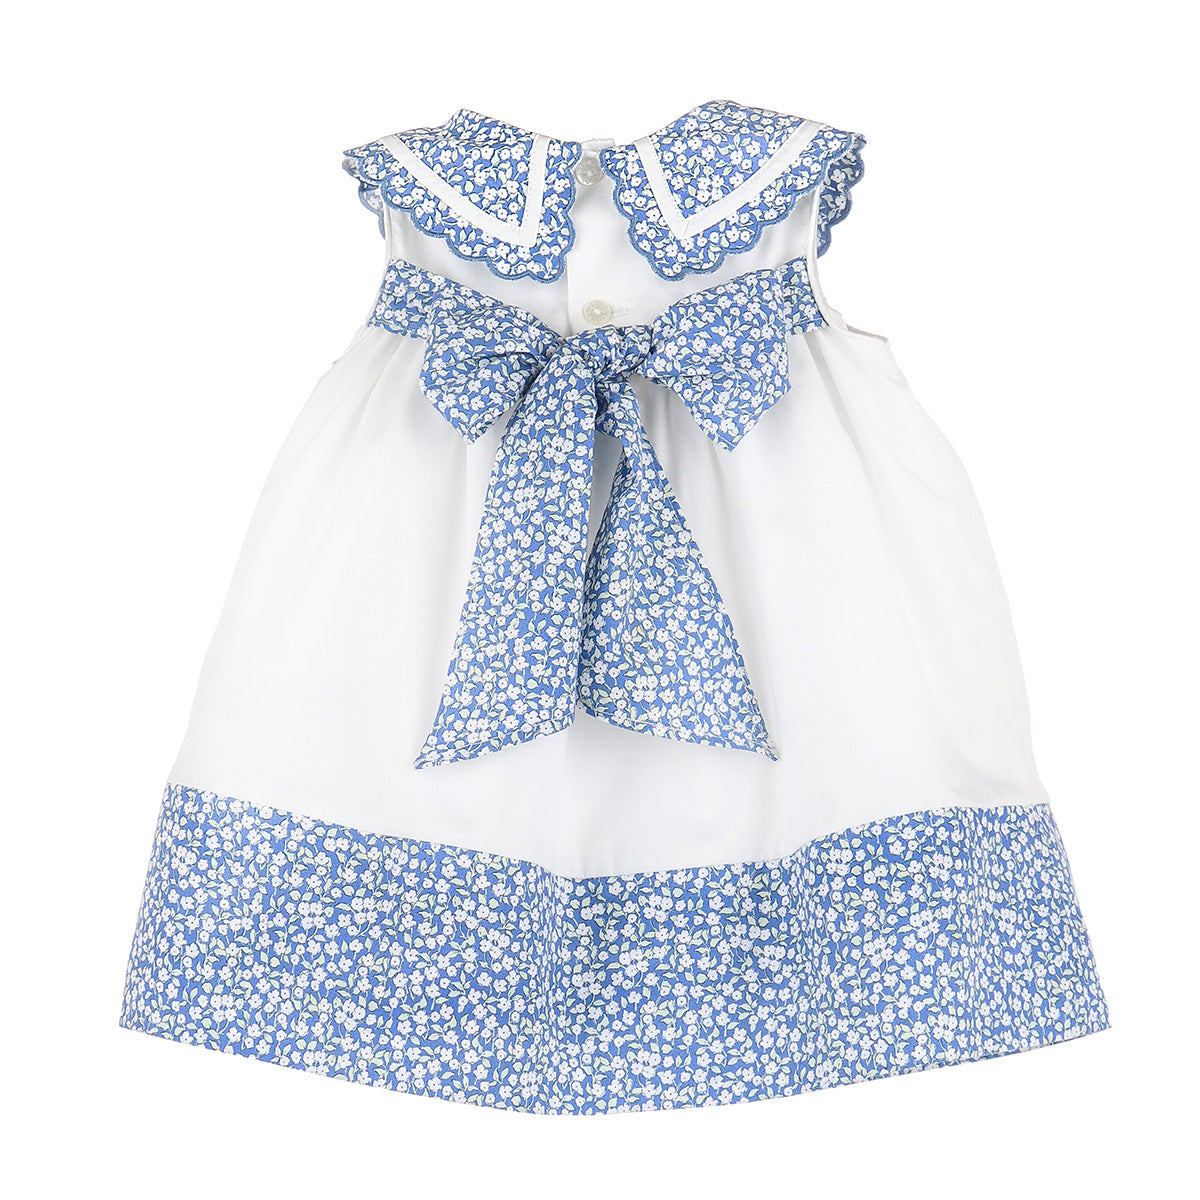 Toddler Girls Bloomy Embroidered Scalloped Collar Dress Sophie & Lucas